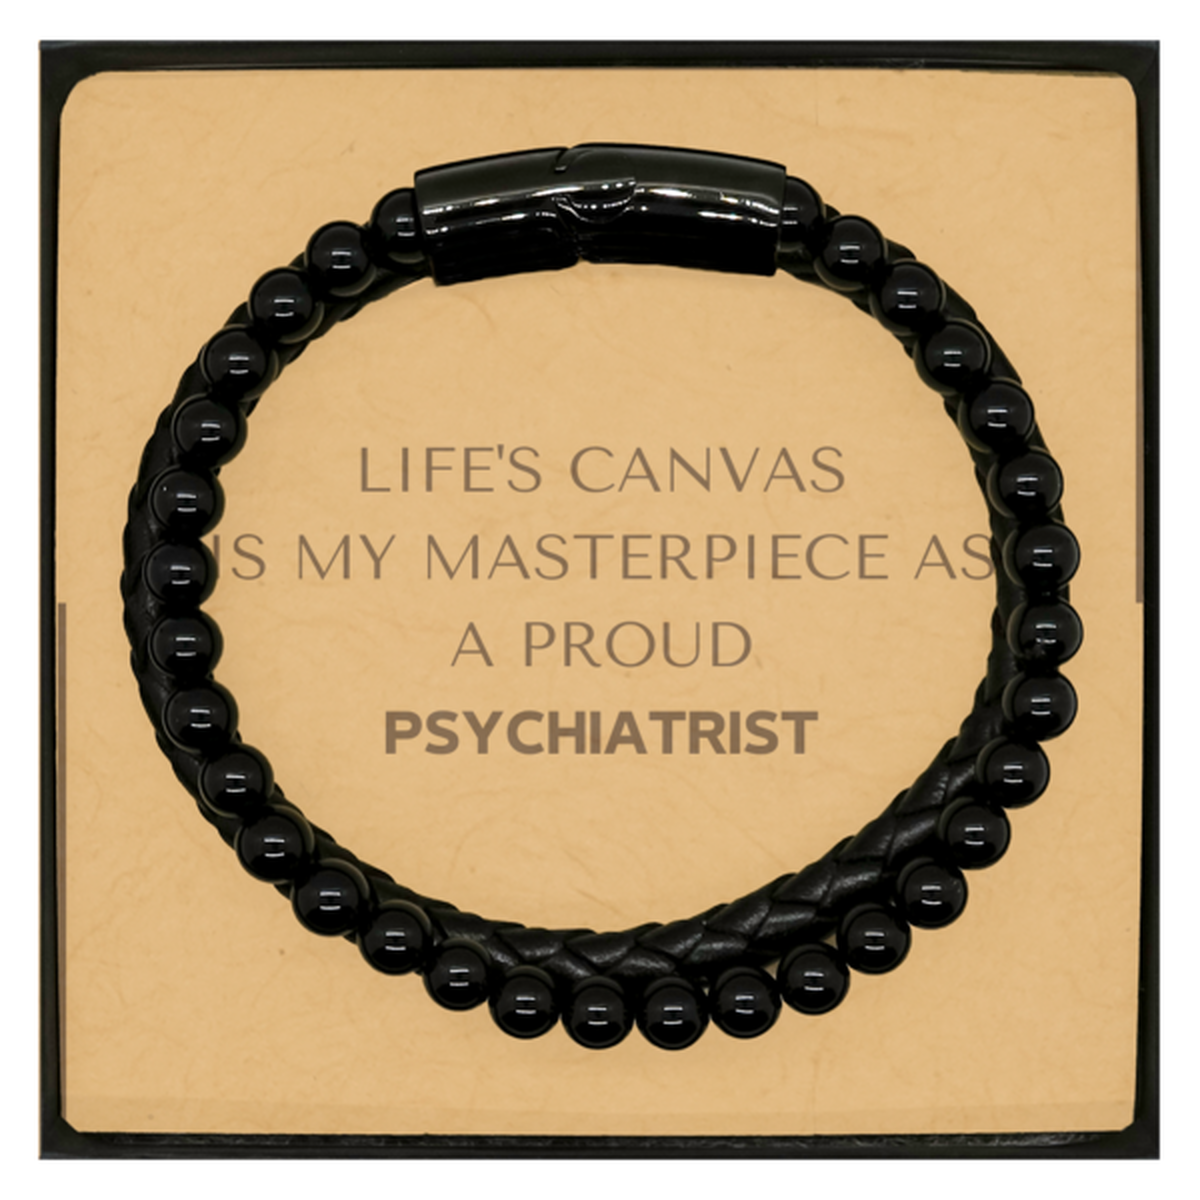 Proud Psychiatrist Gifts, Life's canvas is my masterpiece, Epic Birthday Christmas Unique Stone Leather Bracelets For Psychiatrist, Coworkers, Men, Women, Friends